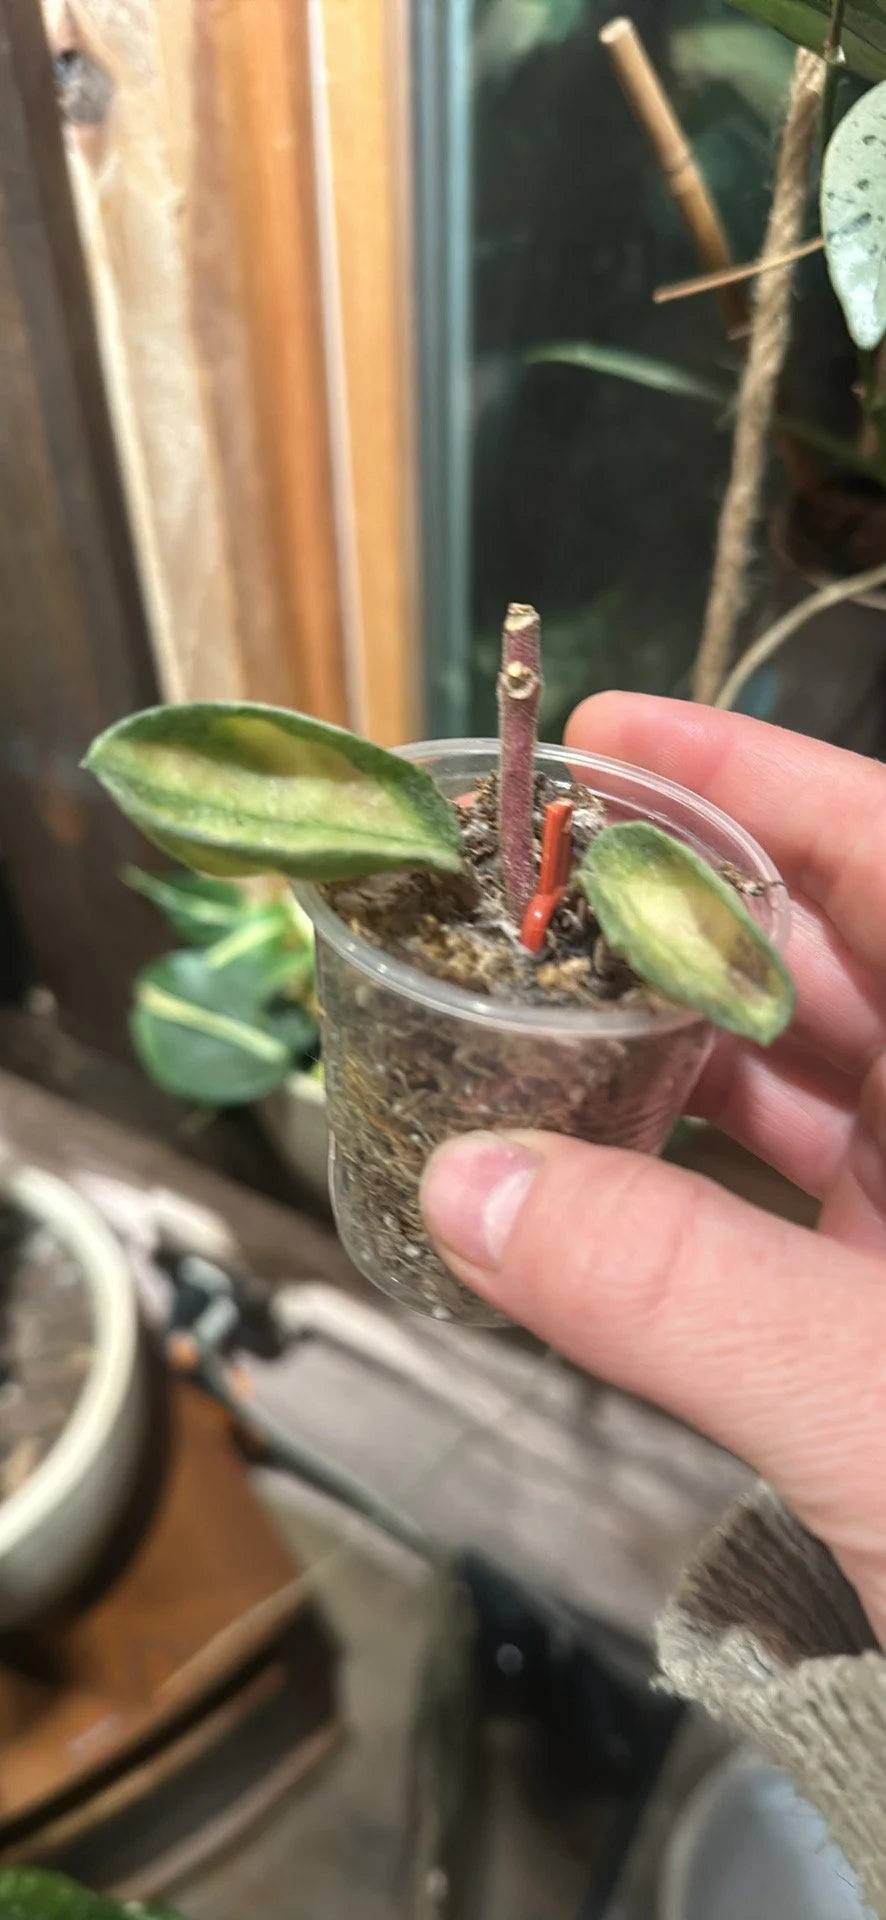 A person holds a small plant in a cup. The image is related to Hoya Plant Pruning and Training.